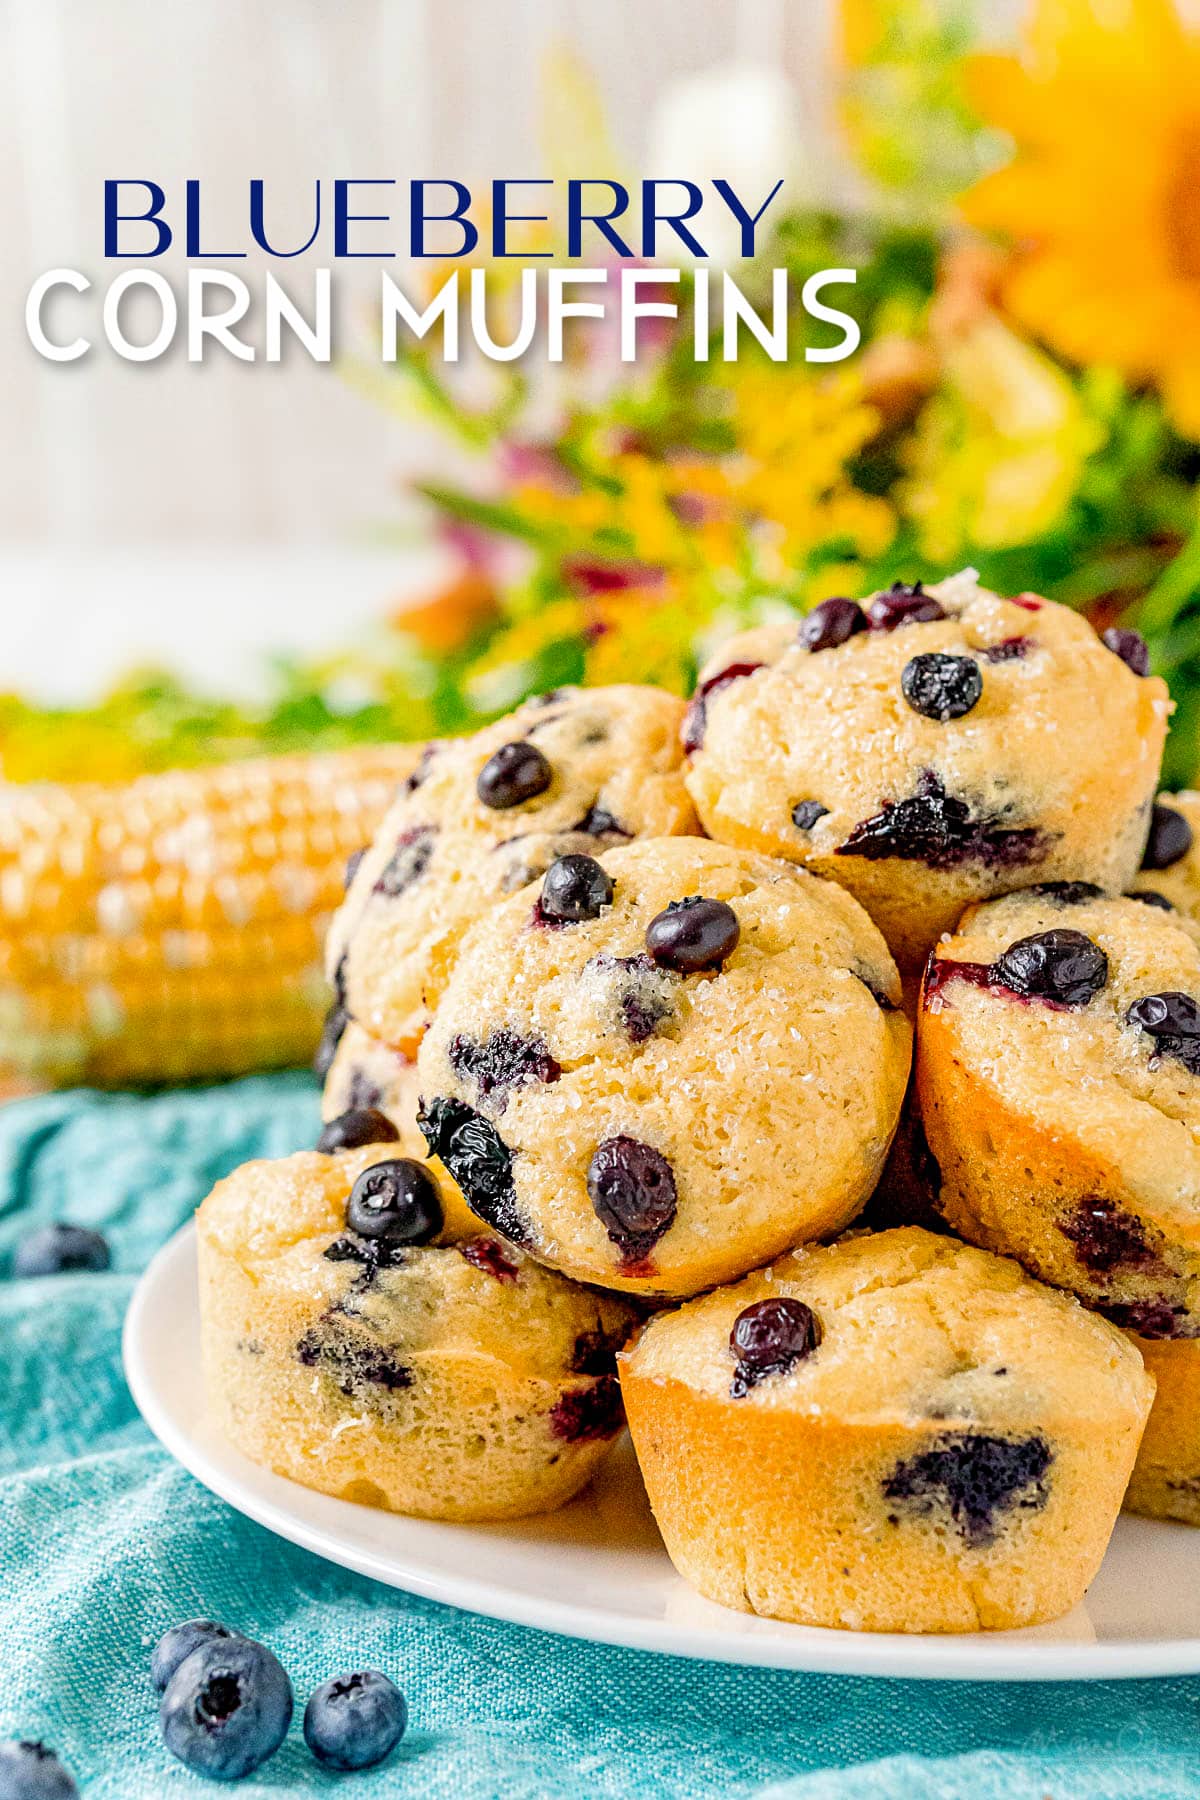 blueberry corn muffins piled high on white plate sitting on blue napkin with text overlay